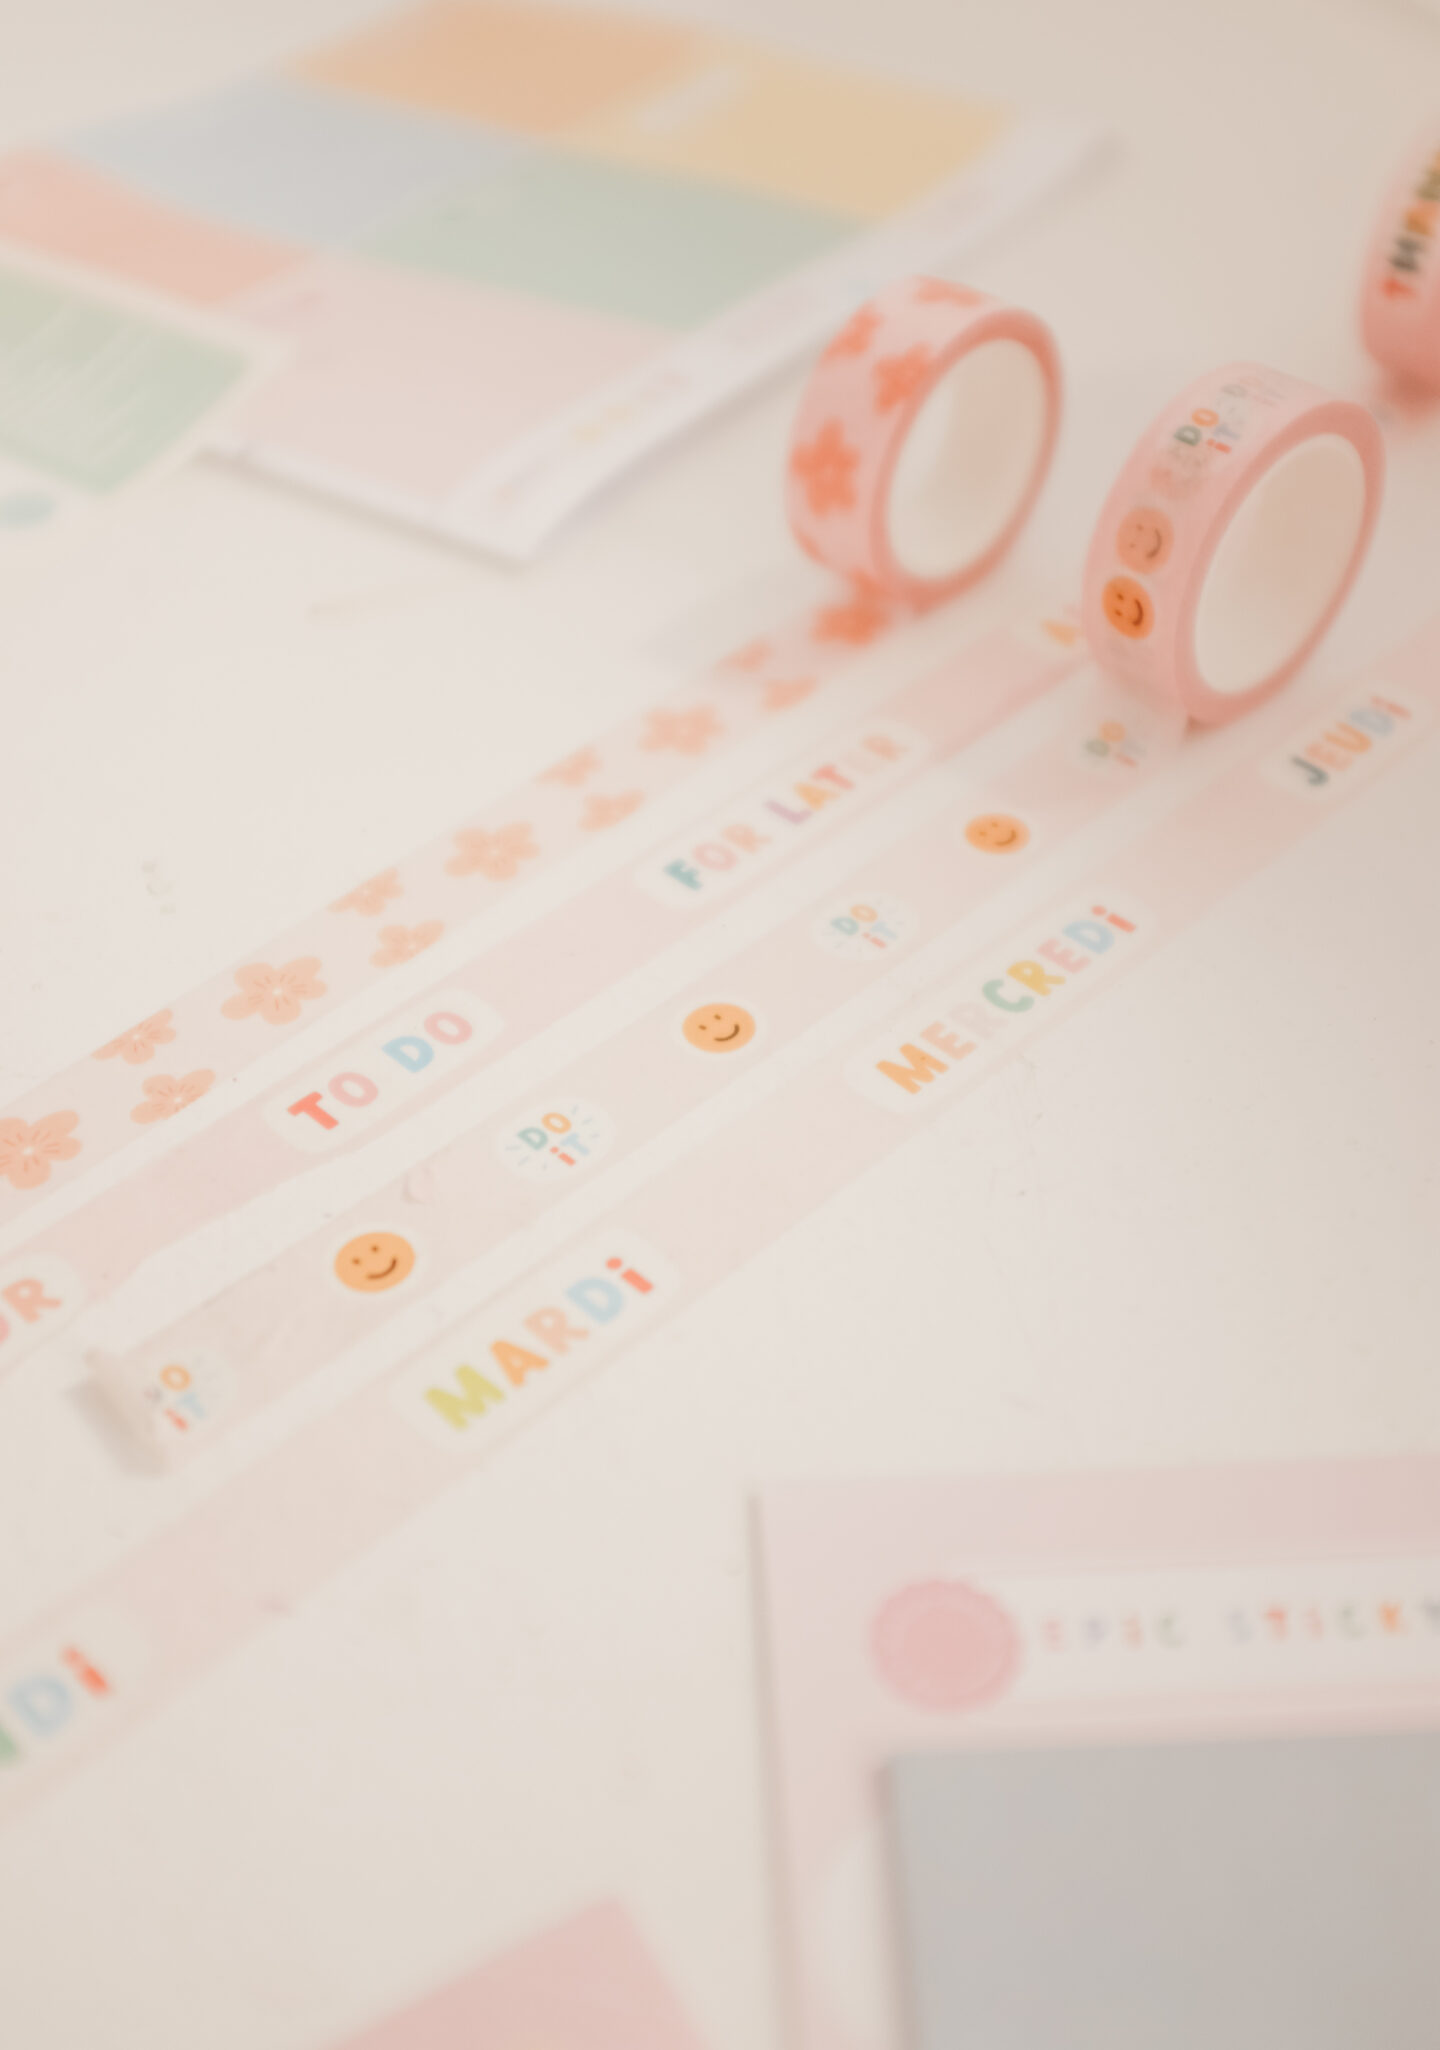 Washi Tapes in Pink and Cute Letters - HeyMaca Shop